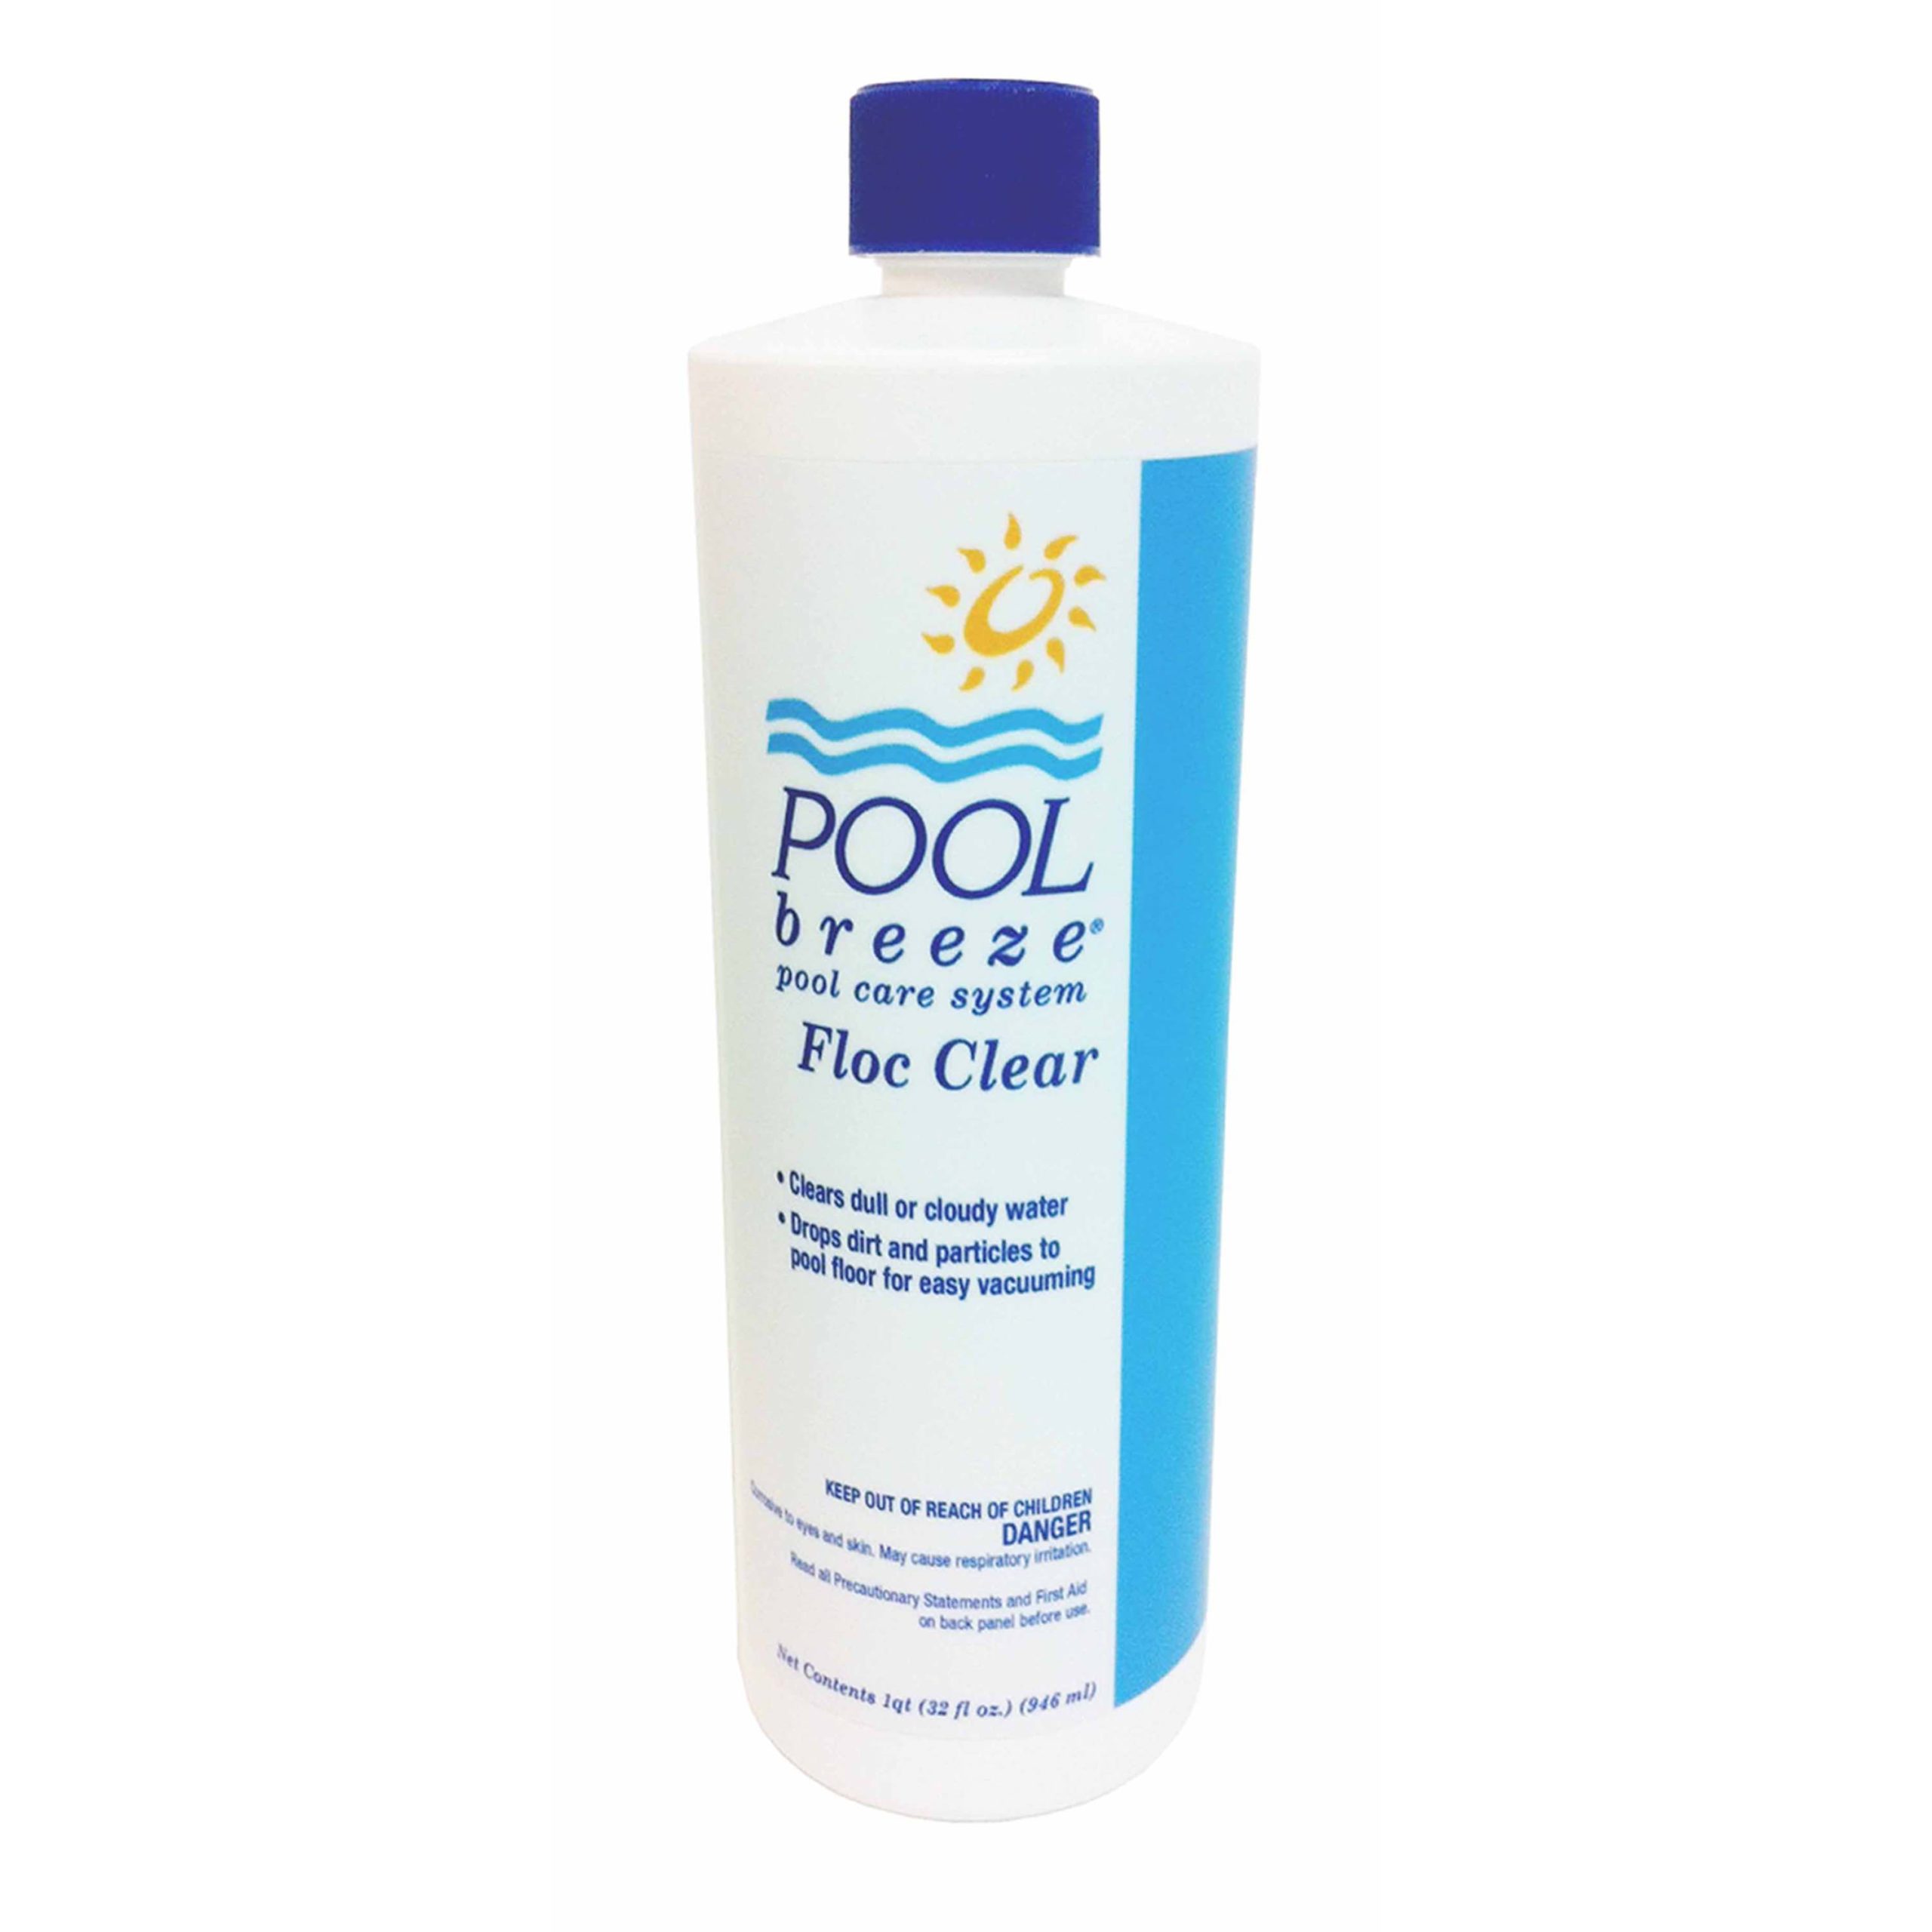 POOL Breeze Floc Clear - clears cloudy or dull pool water